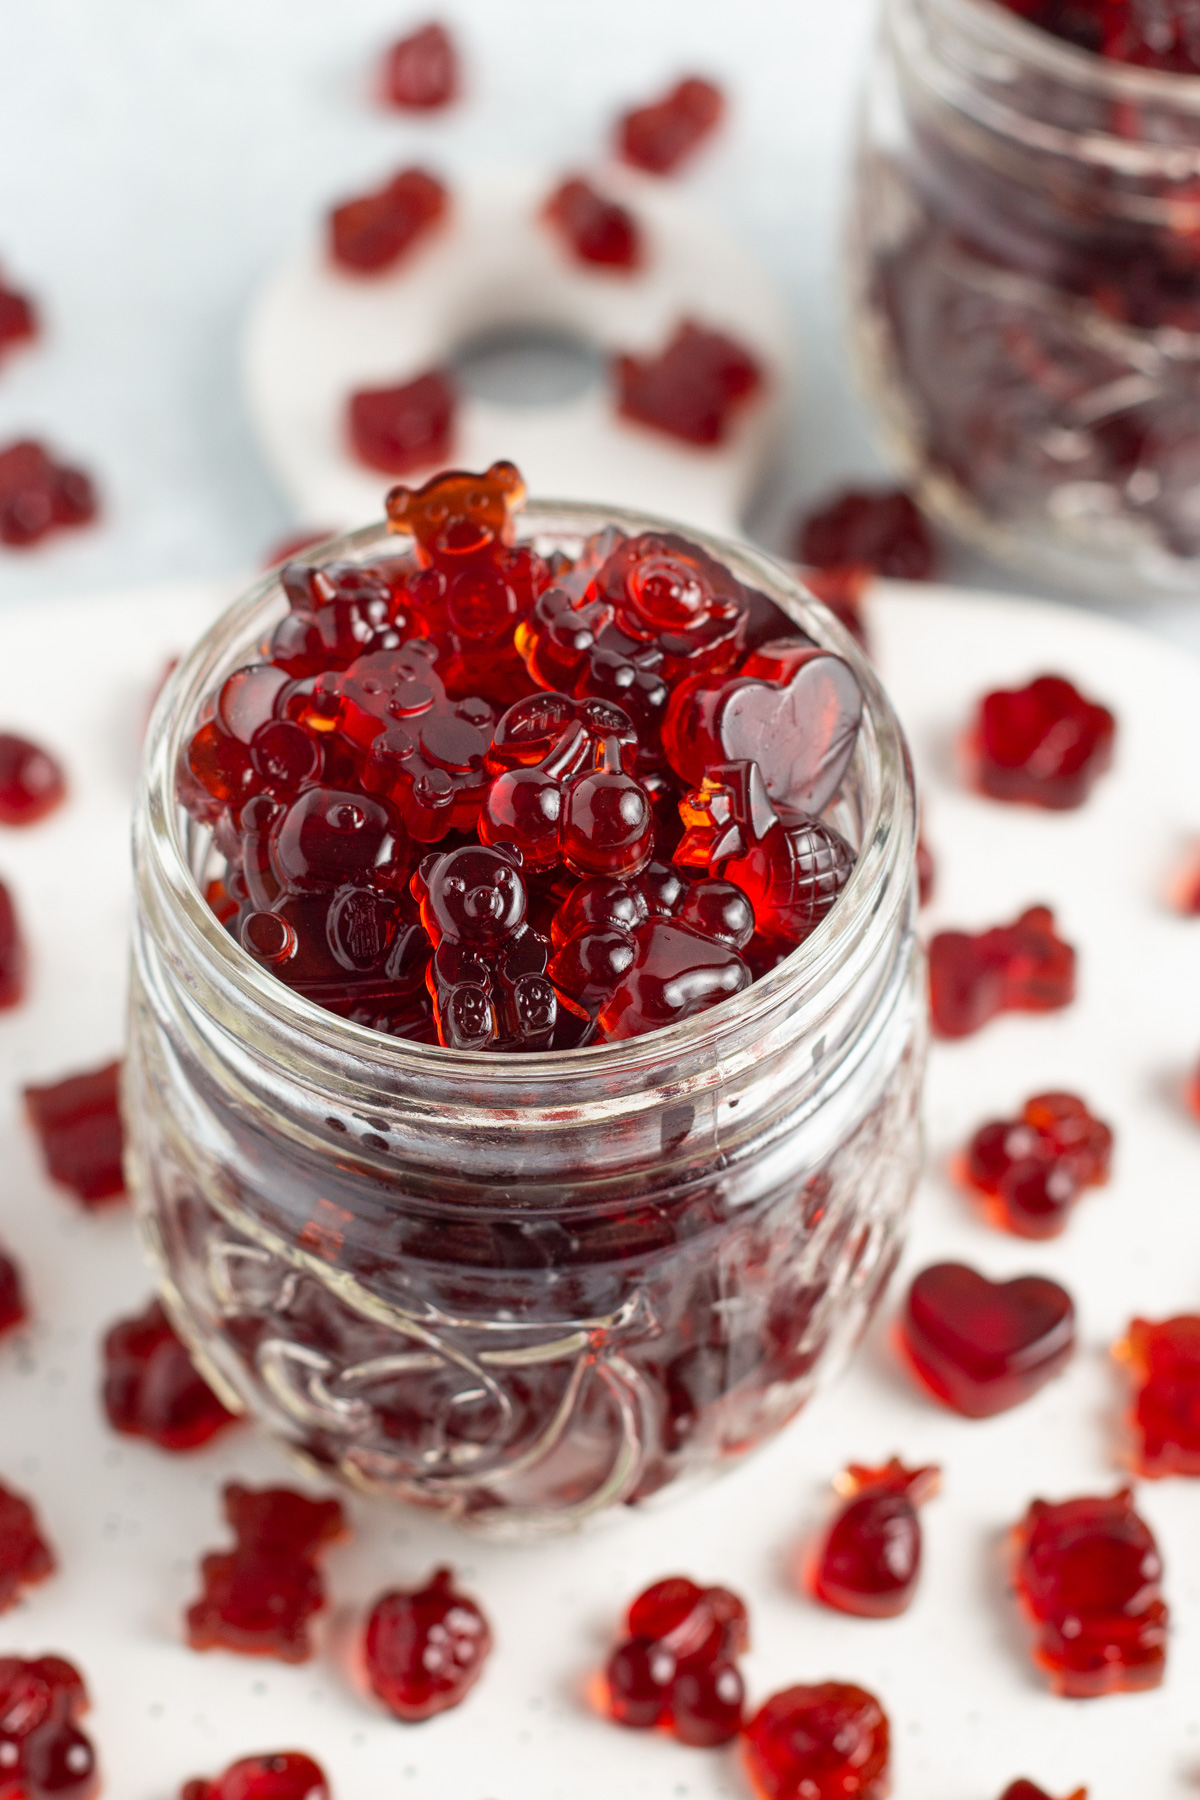 Close-up, overhead, angled view of a glass jar overflowing with bright red tart cherry gummies on a white countertop.